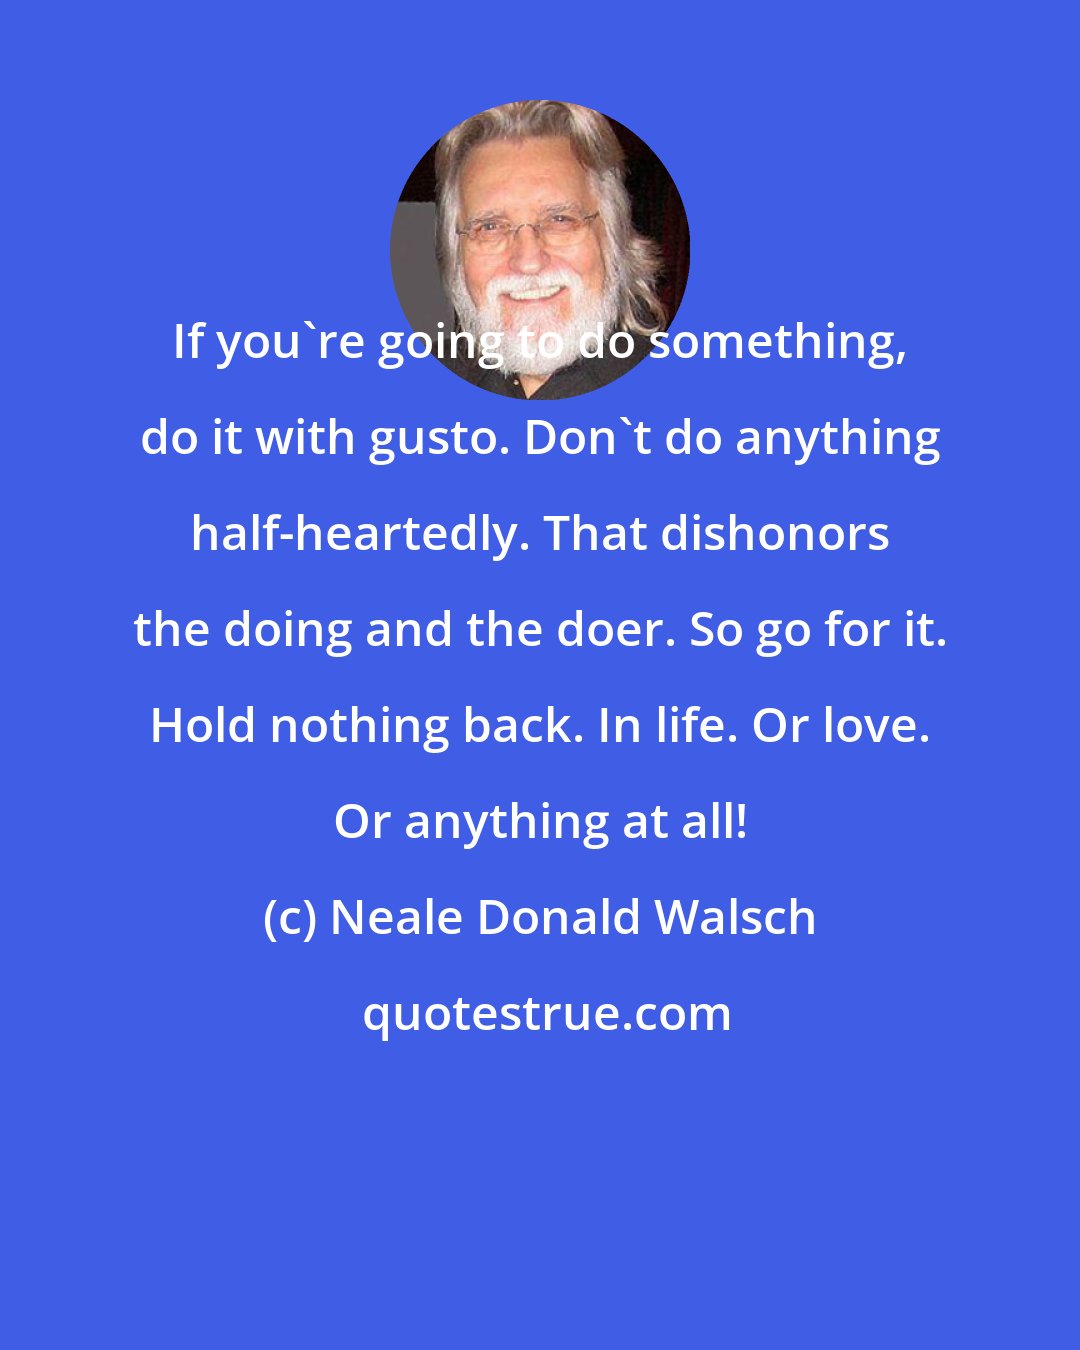 Neale Donald Walsch: If you're going to do something, do it with gusto. Don't do anything half-heartedly. That dishonors the doing and the doer. So go for it. Hold nothing back. In life. Or love. Or anything at all!